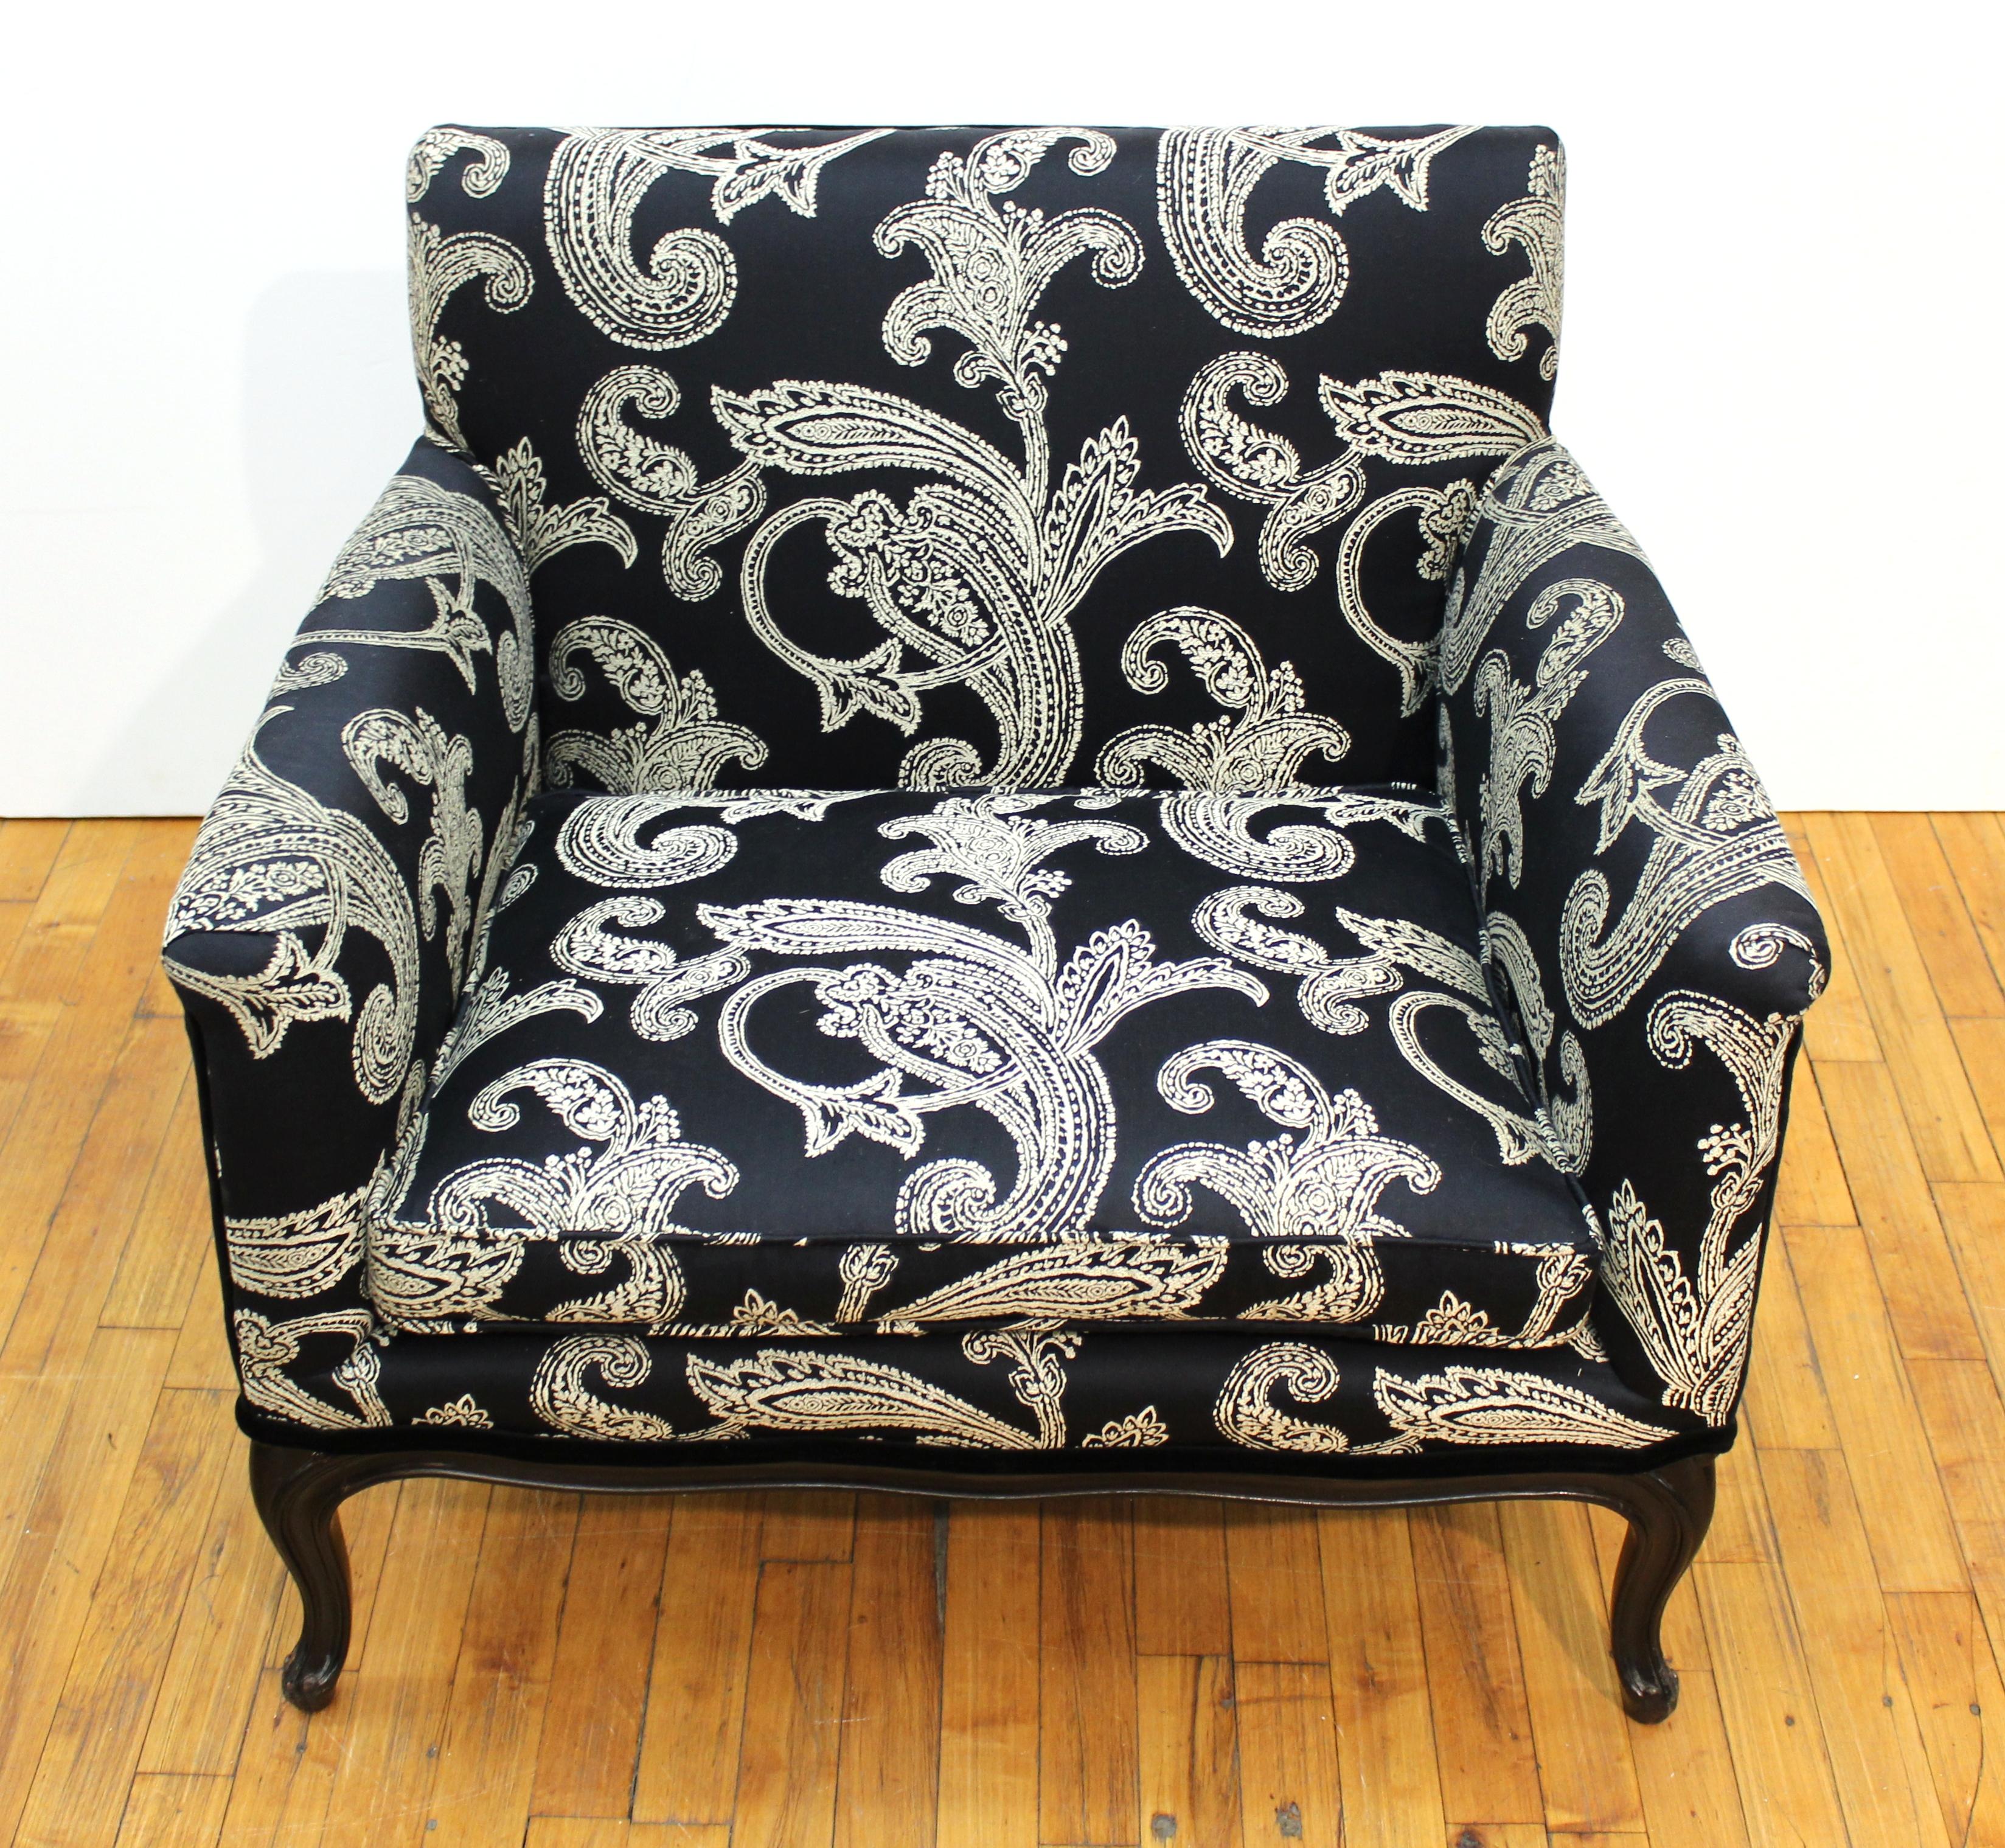 American Mid-Century Modern Cube Armchairs in Ralph Lauren Paisley Fabric Upholstery